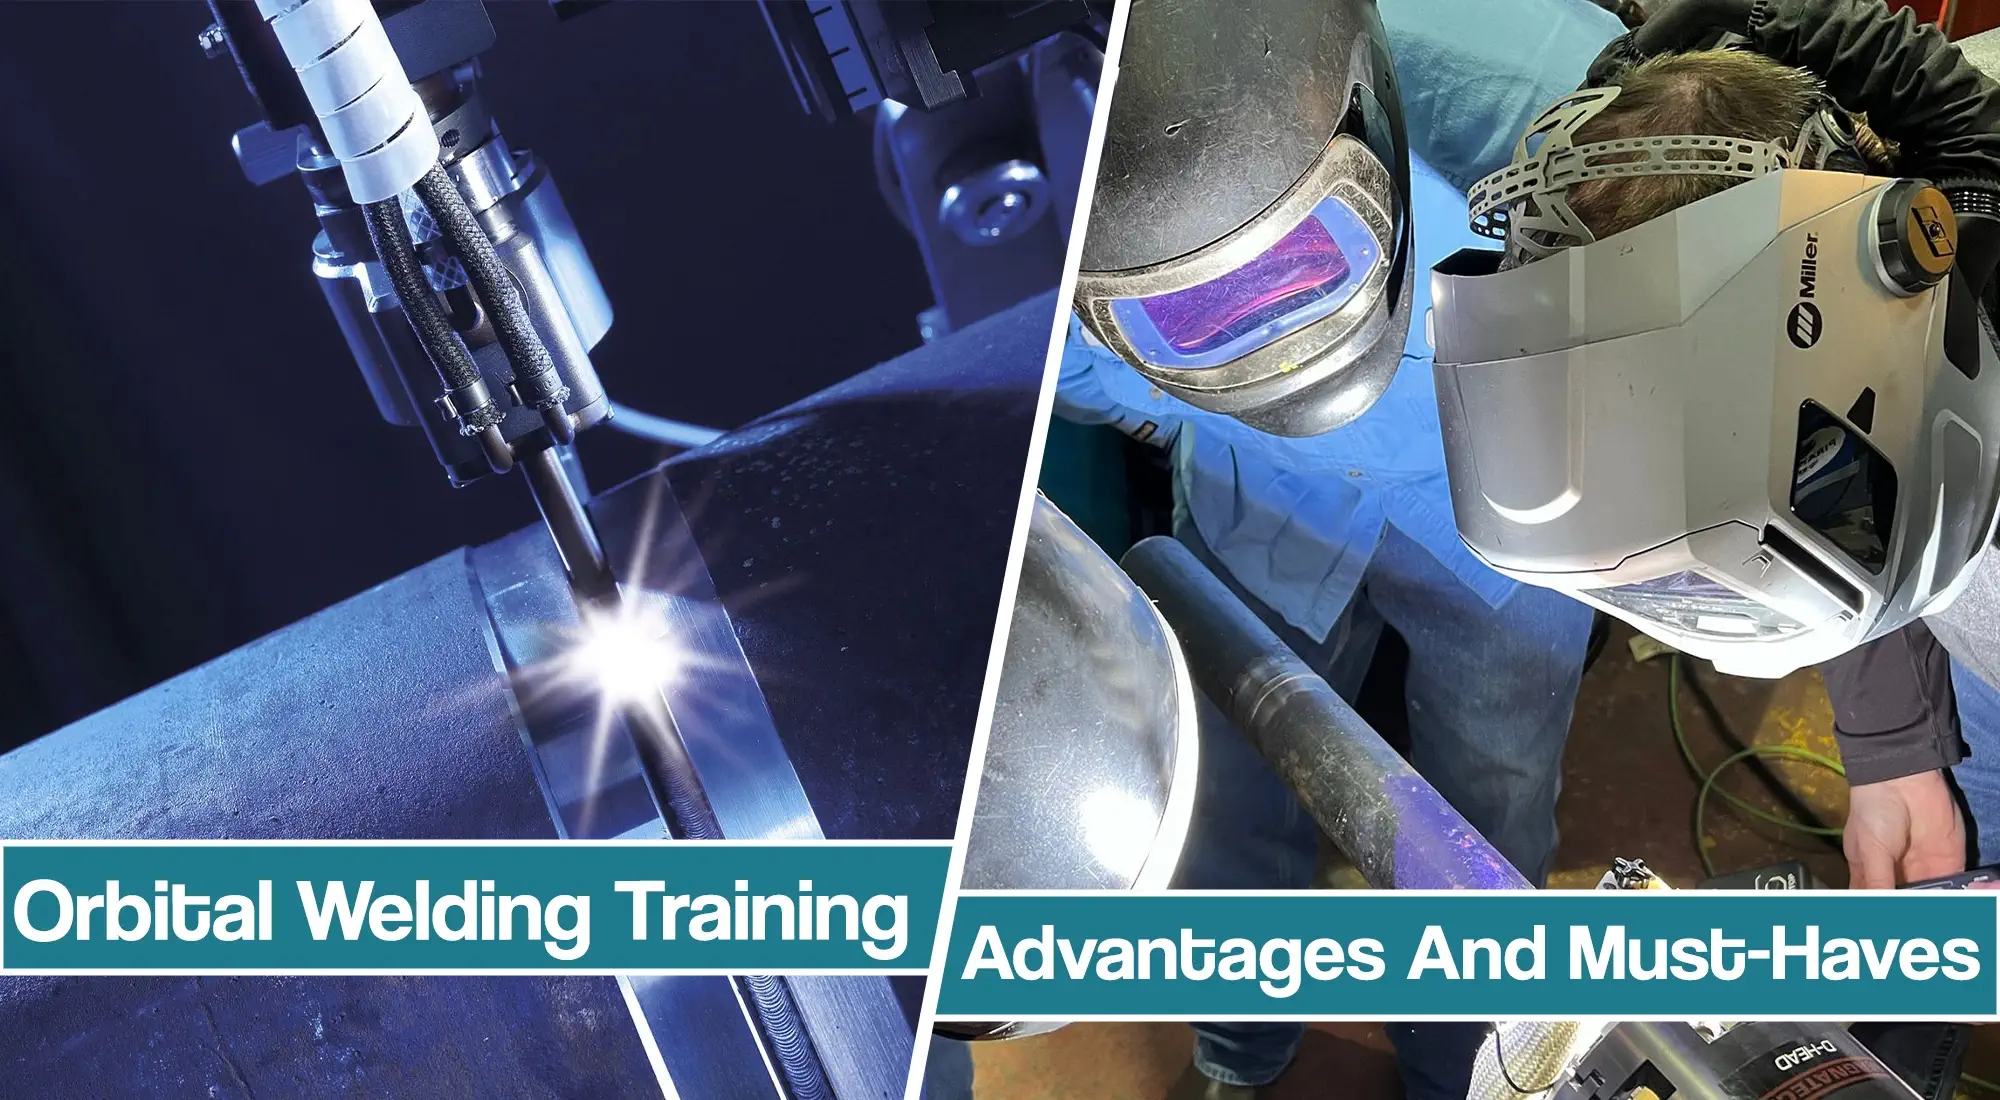 Orbital Welding Training and Certification – Advantages And Must-Haves